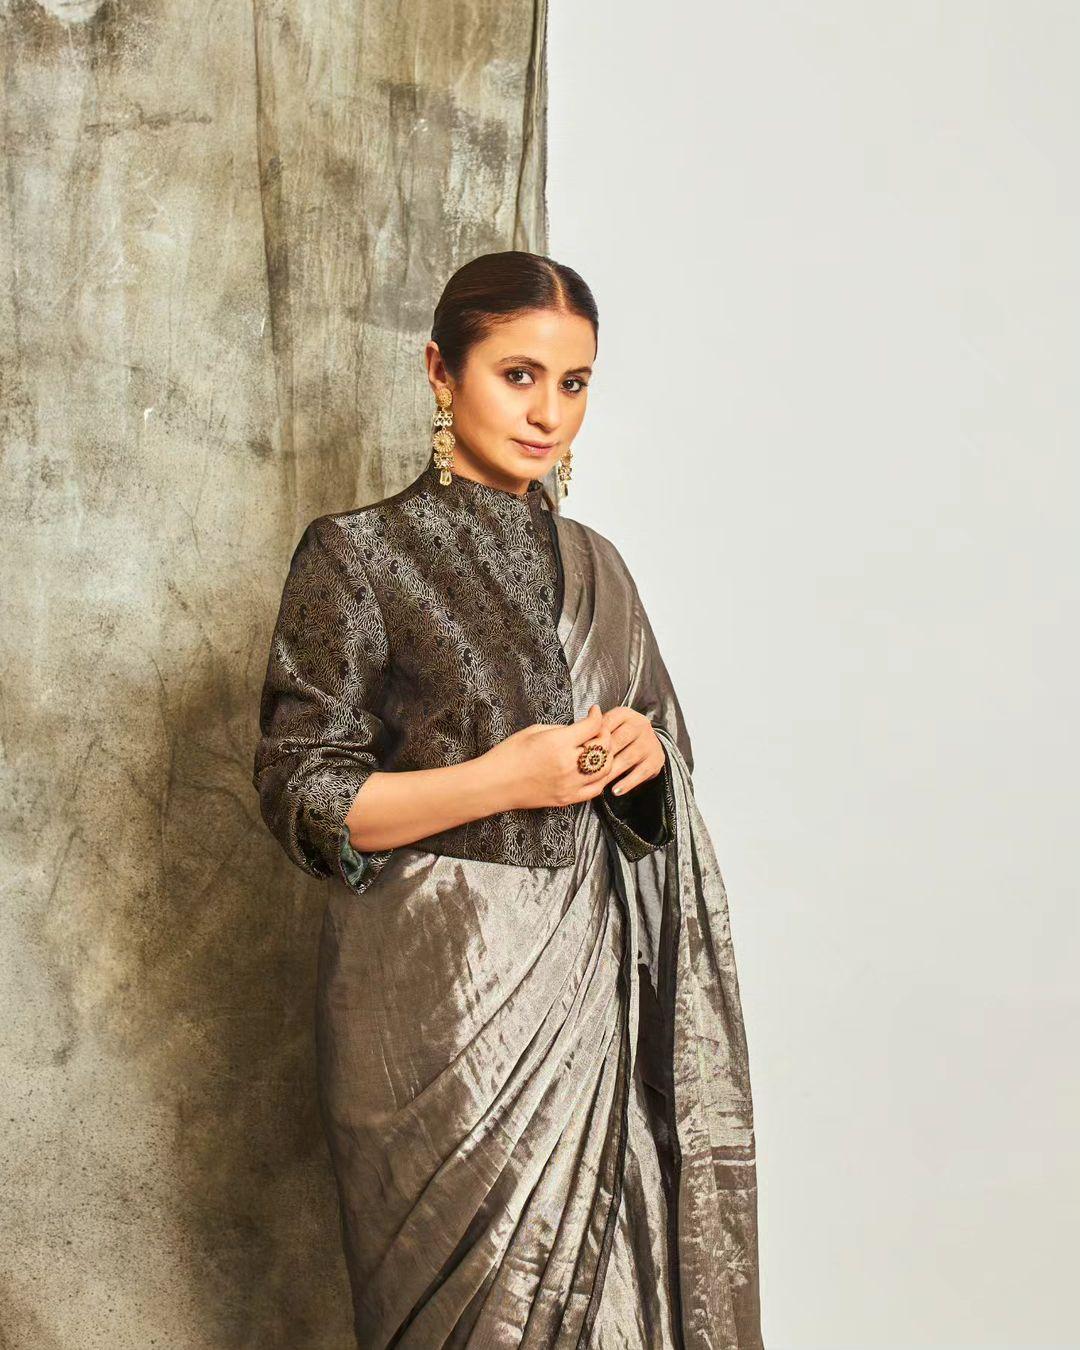 For one of her more sophisticated saree ensembles, Rasika opted for a grey saree paired with a closed, collared blouse featuring half-sleeves. This particular saree was sourced from Raw Mango's wardrobe collection.